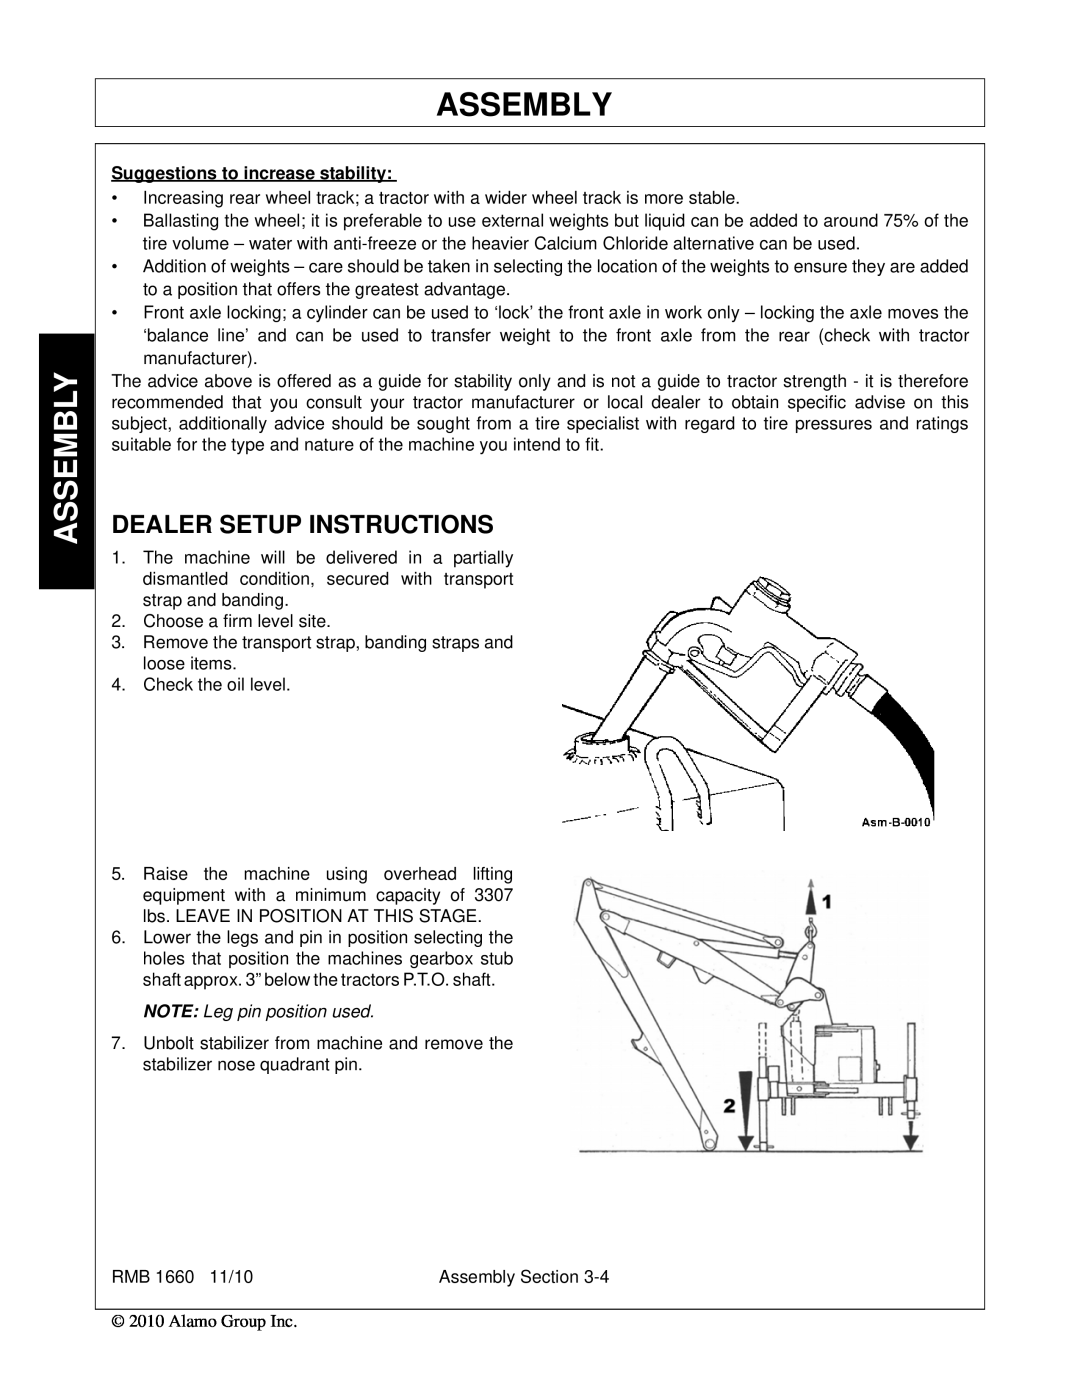 Bush Hog RMB 1660 manual Assembly, Dealer Setup Instructions, Suggestions to increase stability 